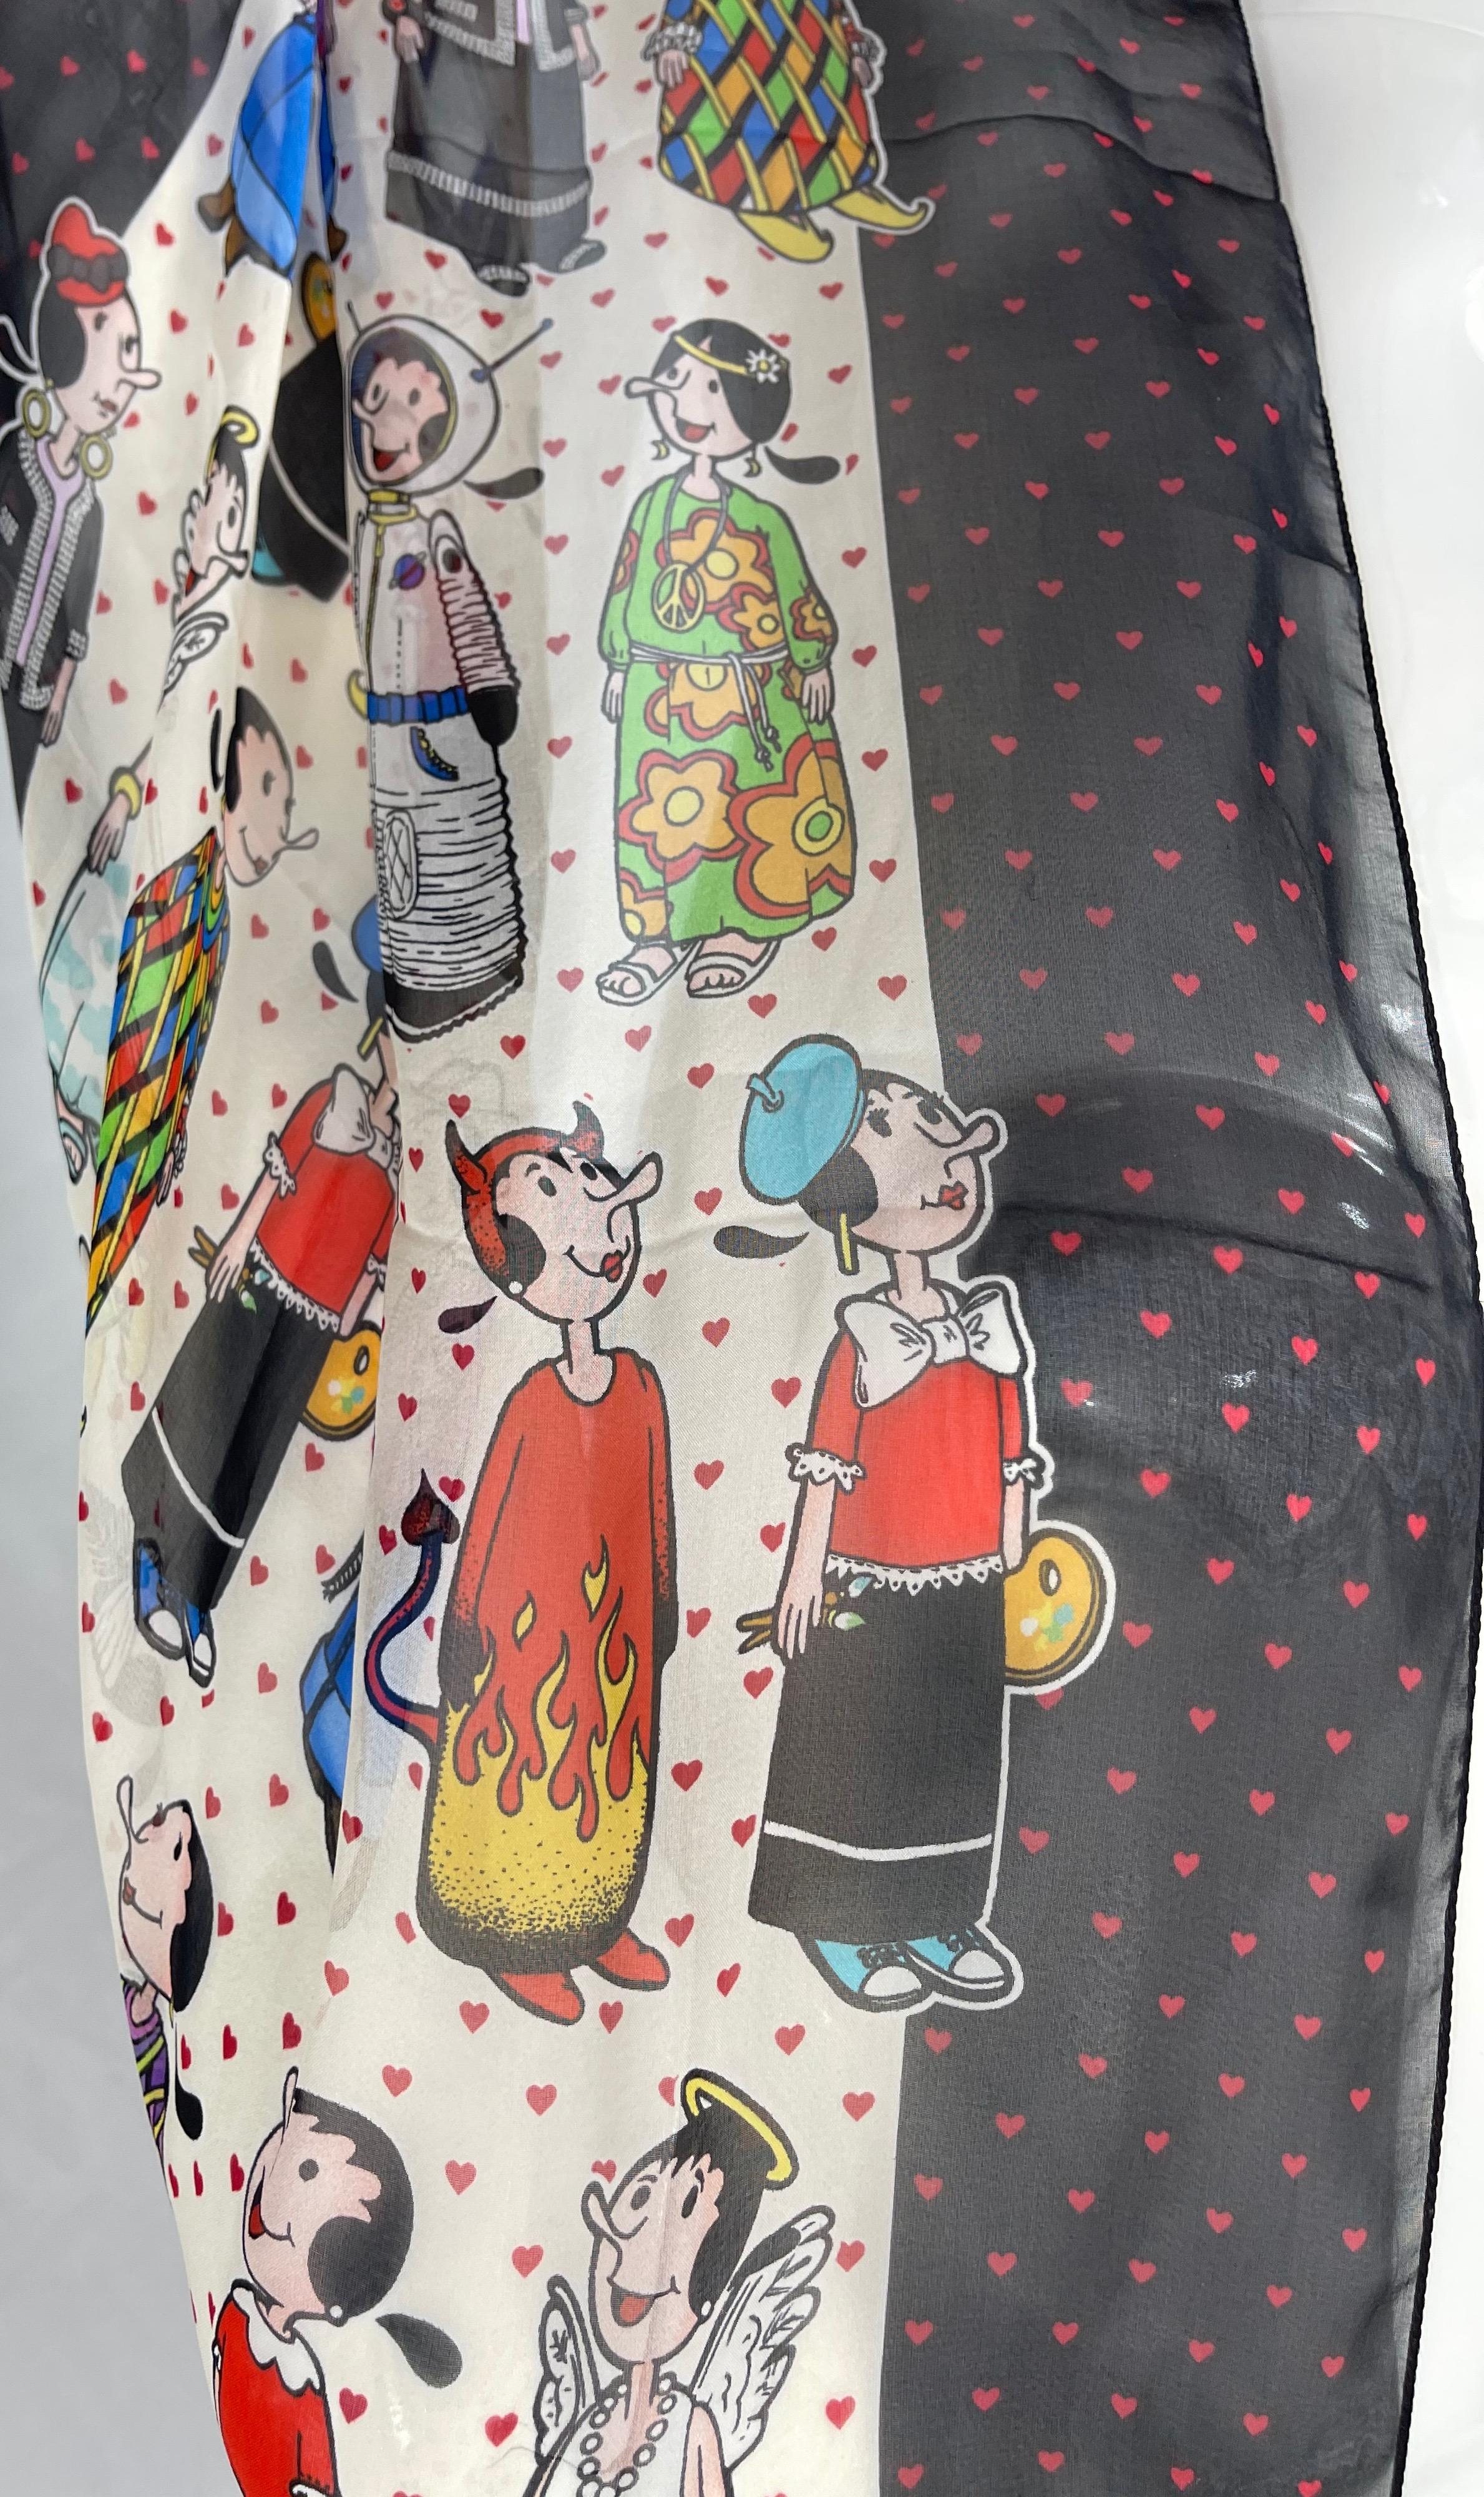 1990s Moschino Cheap and Chic Olive Oyl Popeye Novelty Print Silk Chiffon Scarf In Excellent Condition For Sale In San Diego, CA